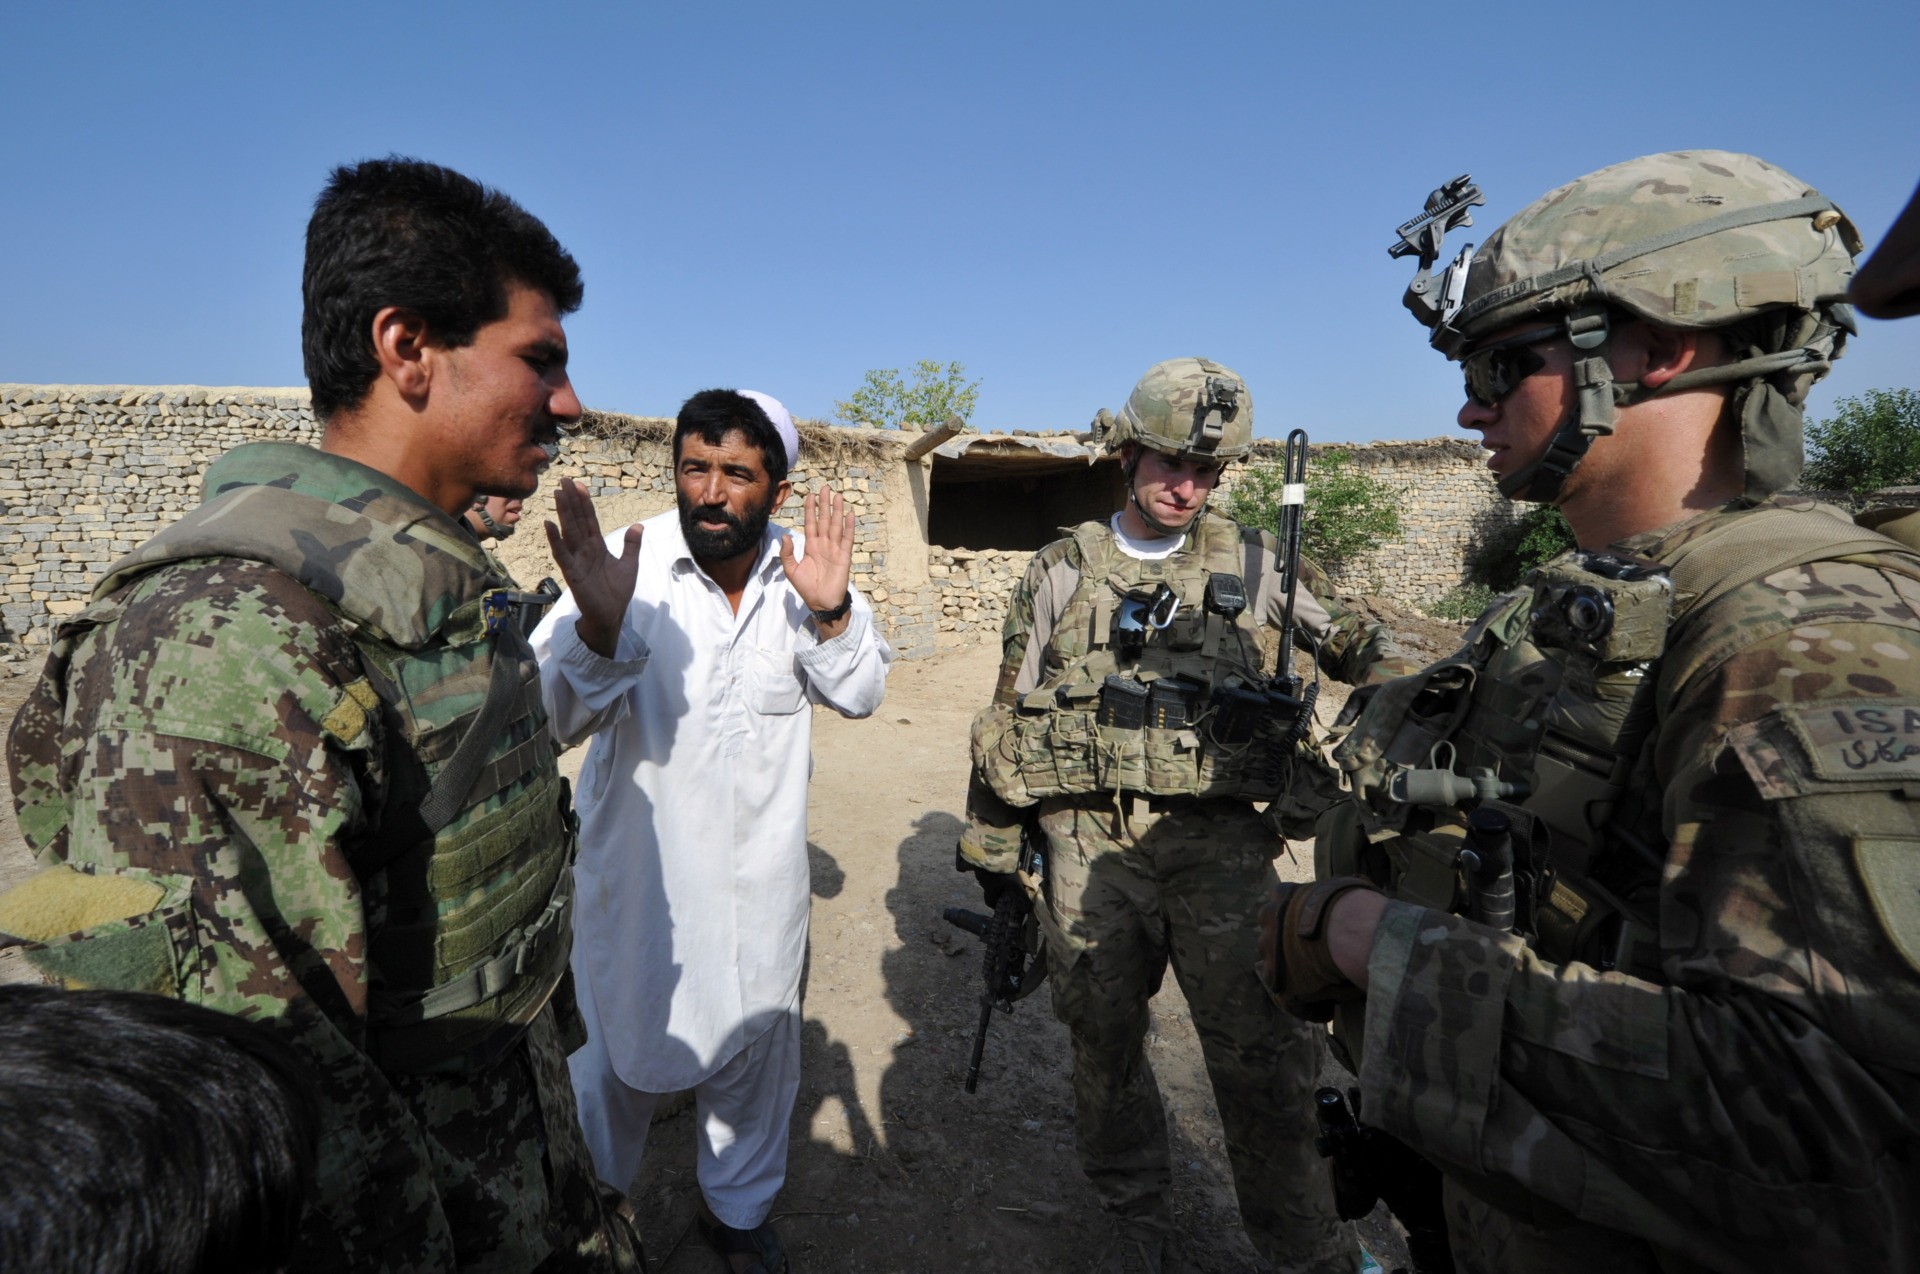 An Afghan soldier (L) serves an interpreter as a civilian talks to US soldiers from Viper Company (Bravo), 1-26 Infantry during a patrol at a village near Combat Outpost (COP) Sabari in Khost province in eastern Afghanistan June 19, 2011. Defense Secretary Robert Gates confirmed June 19, that US officials were involved in preliminary talks with the Taliban to seek a political solution to the Afghan war but said he didn't expect significant progress for months. AFP PHOTO/TED ALJIBE (Photo credit should read TED ALJIBE/AFP via Getty Images)